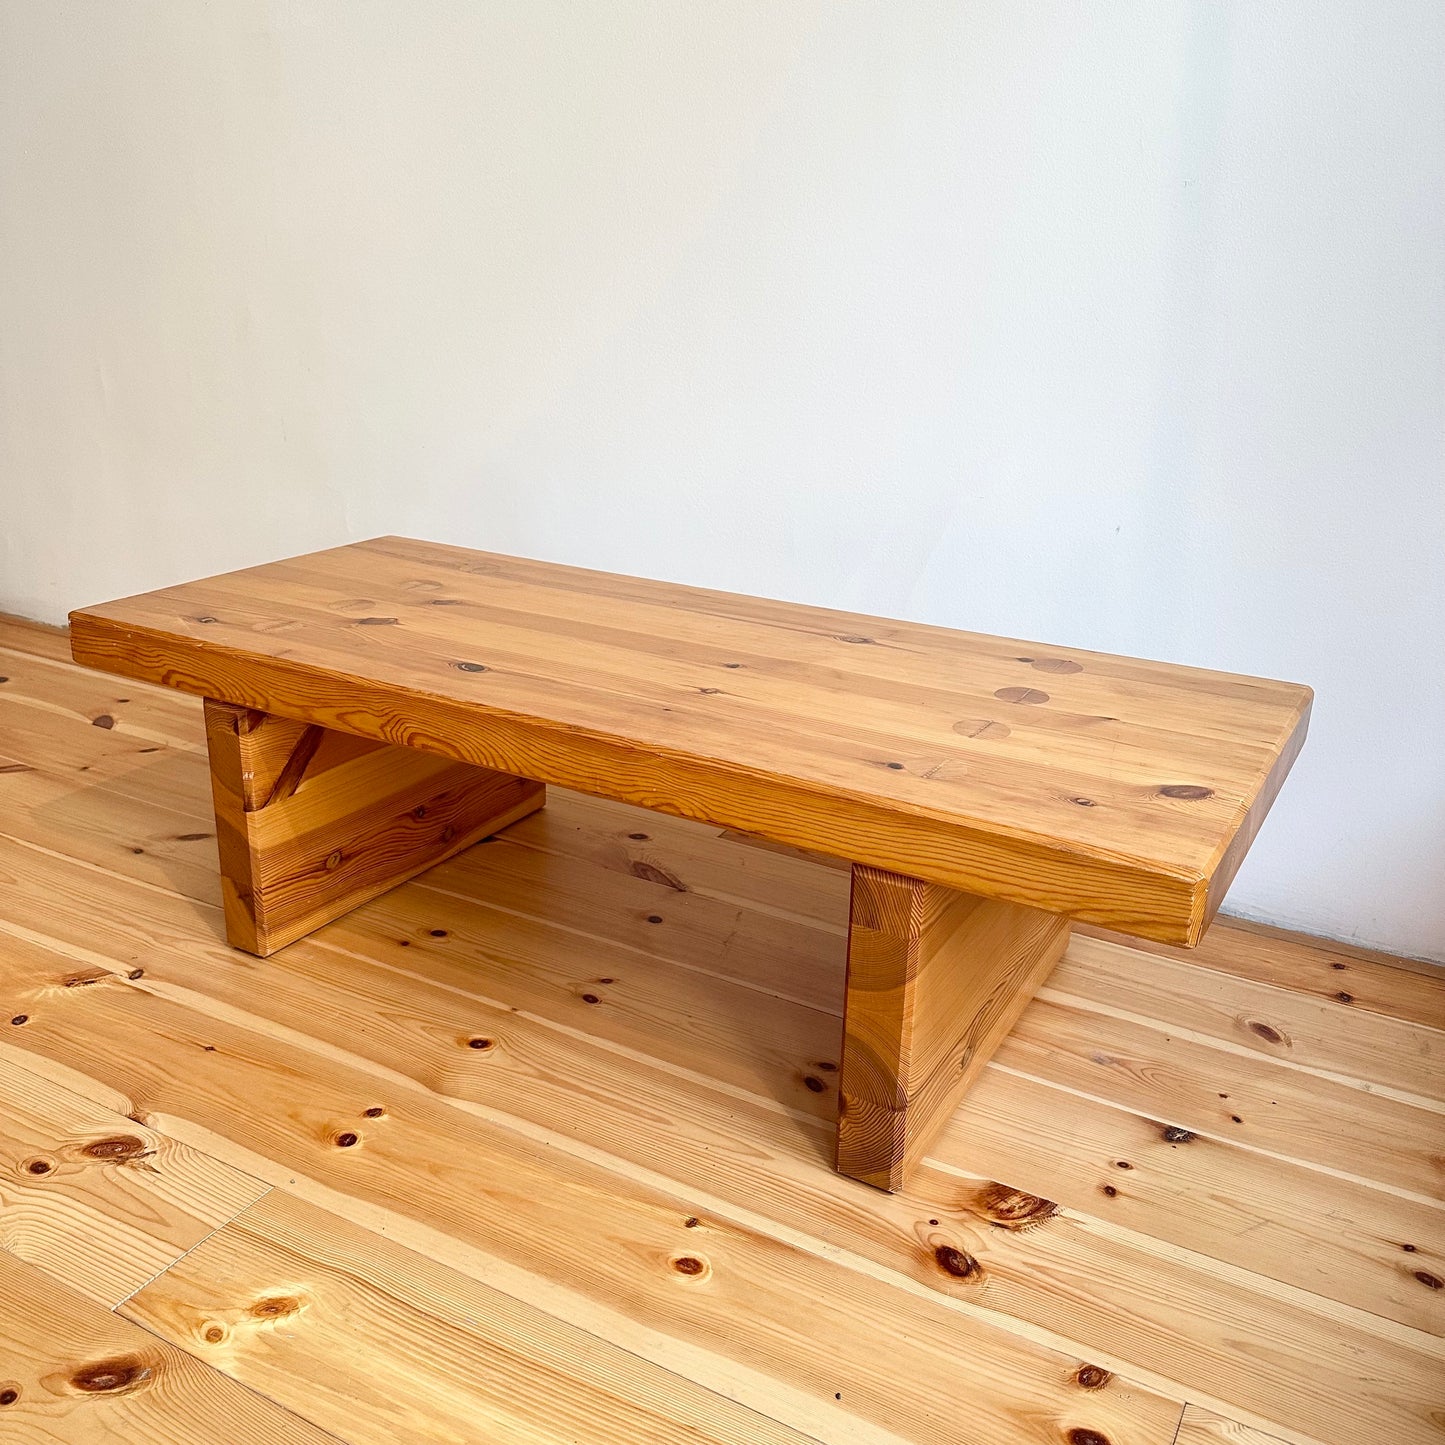 Wooden bench / coffee table by Roland WIlhelmsson